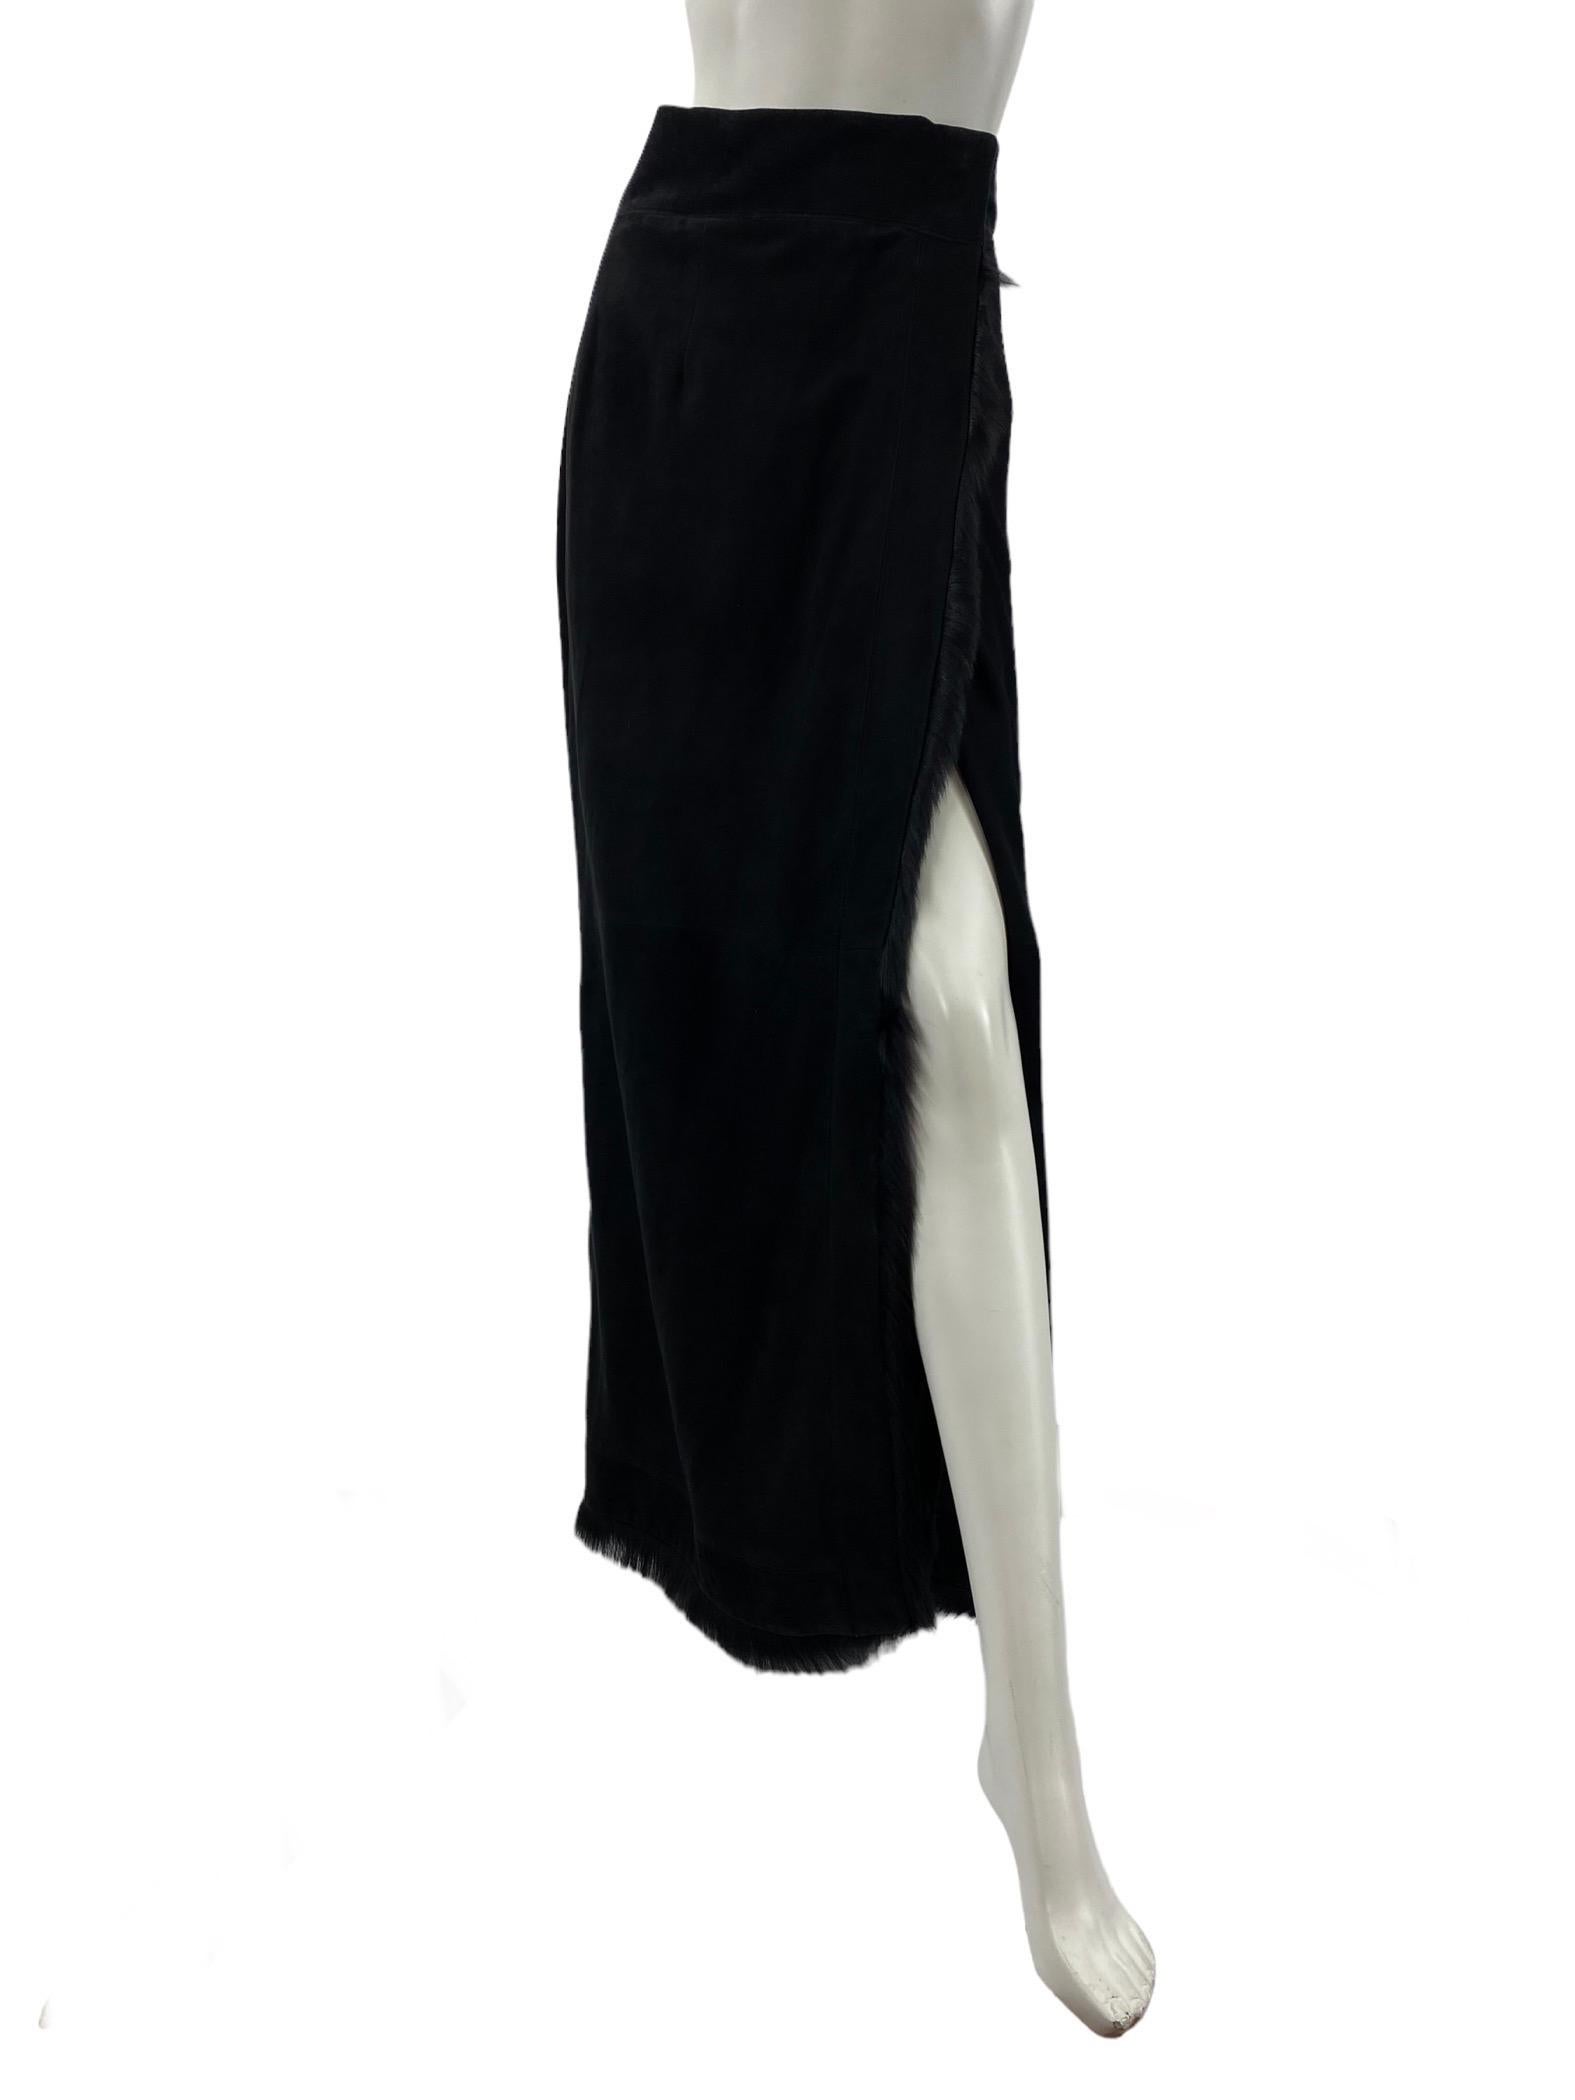 Gucci Black Suede Leather Long Wrap Skirt w/ Fur Trim
Vintage 1996 Tom Ford for Gucci 
Italian size 42
High Waisted with Hook and Eye Closure, Fully Lined.
Measurements: Length - 44 inches, Waist - 28